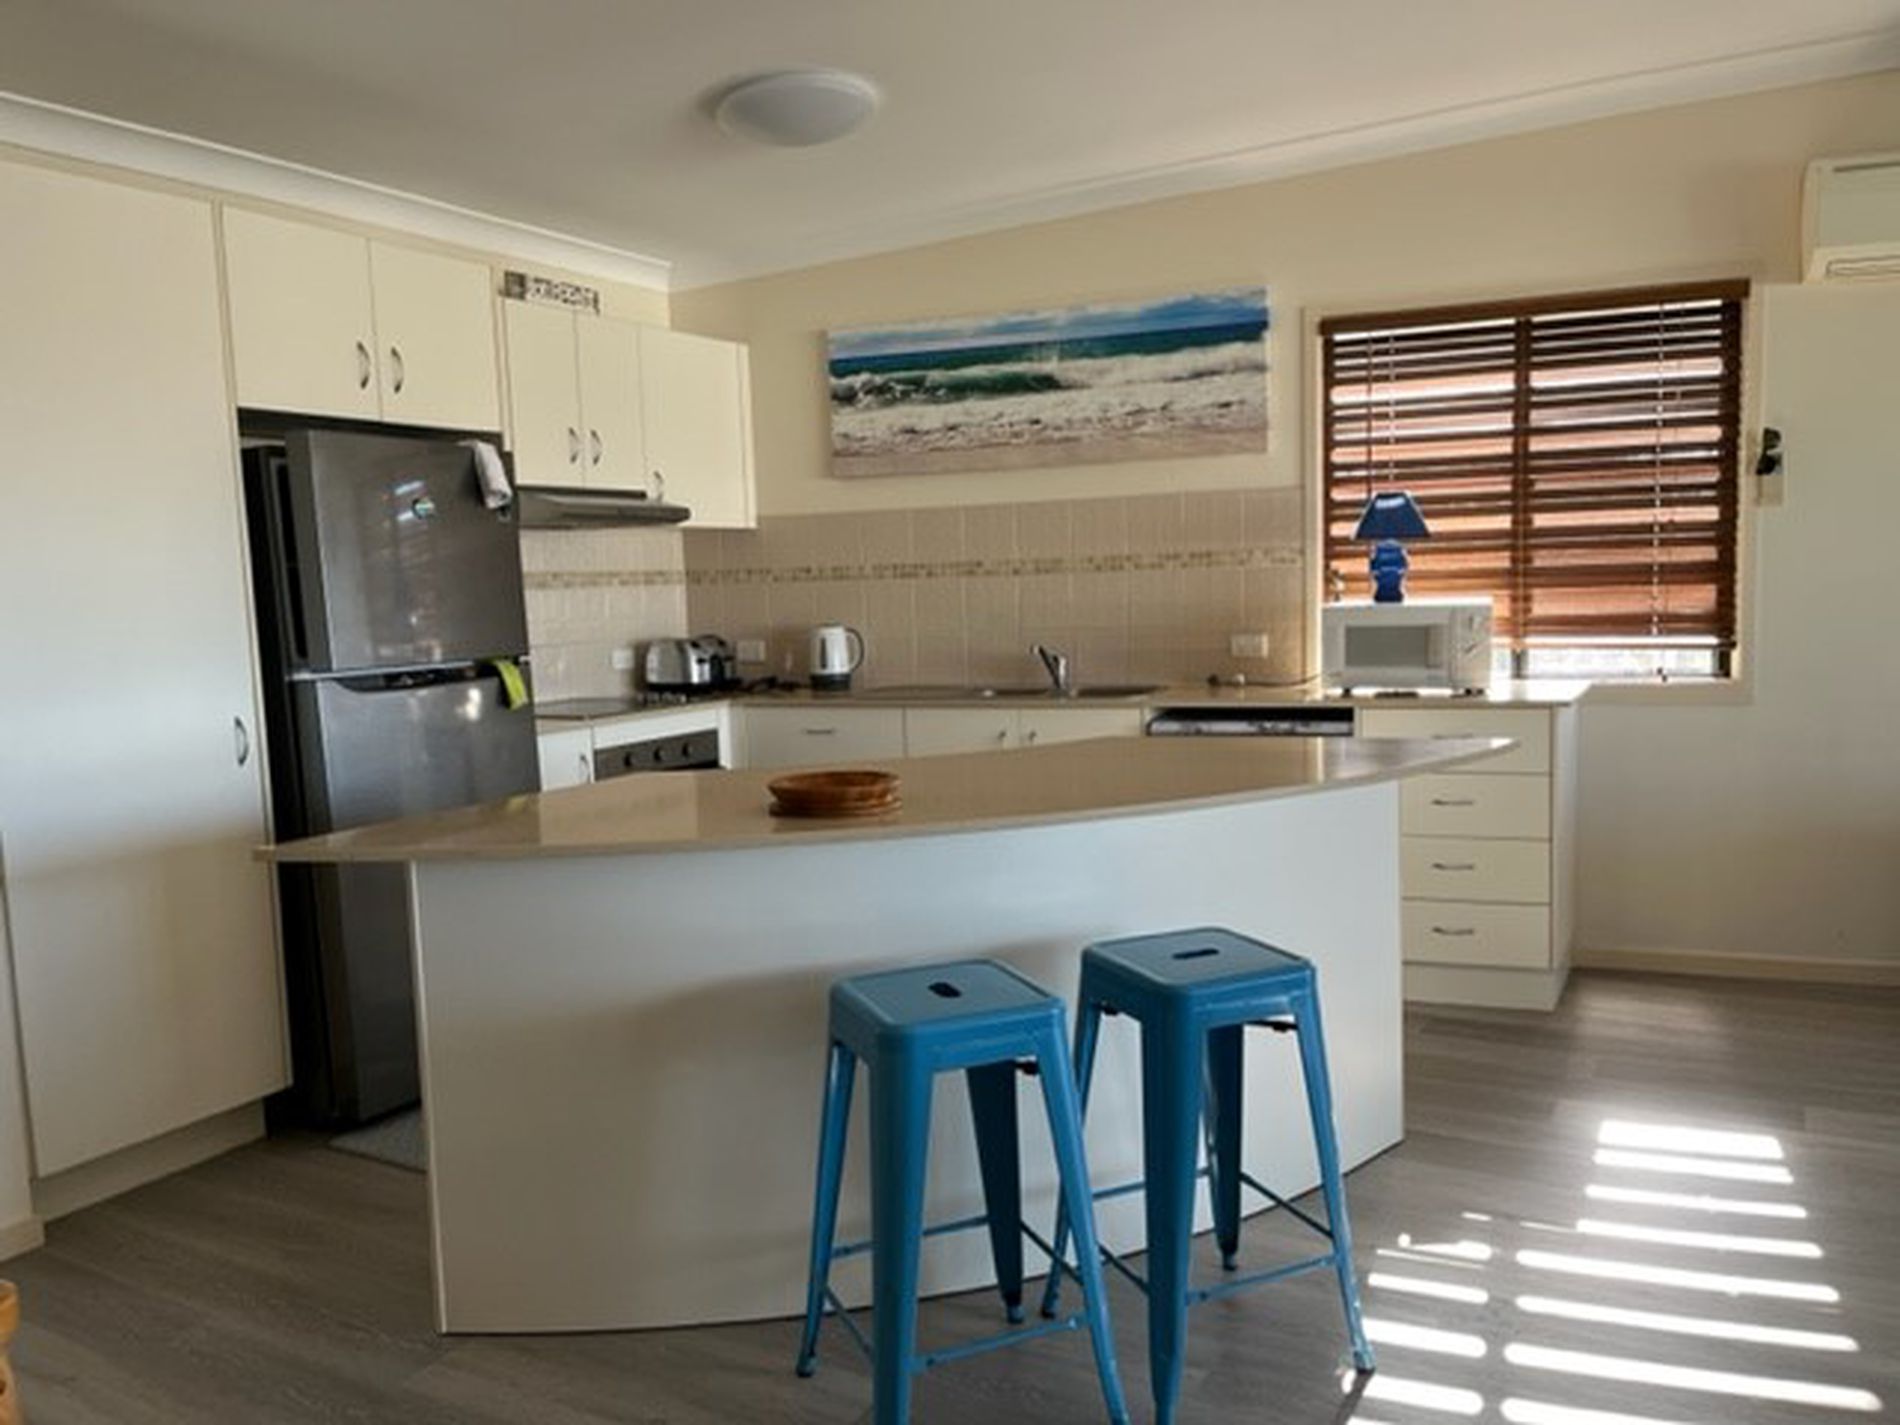 unit 1 / 57 First Avenue, Woodgate